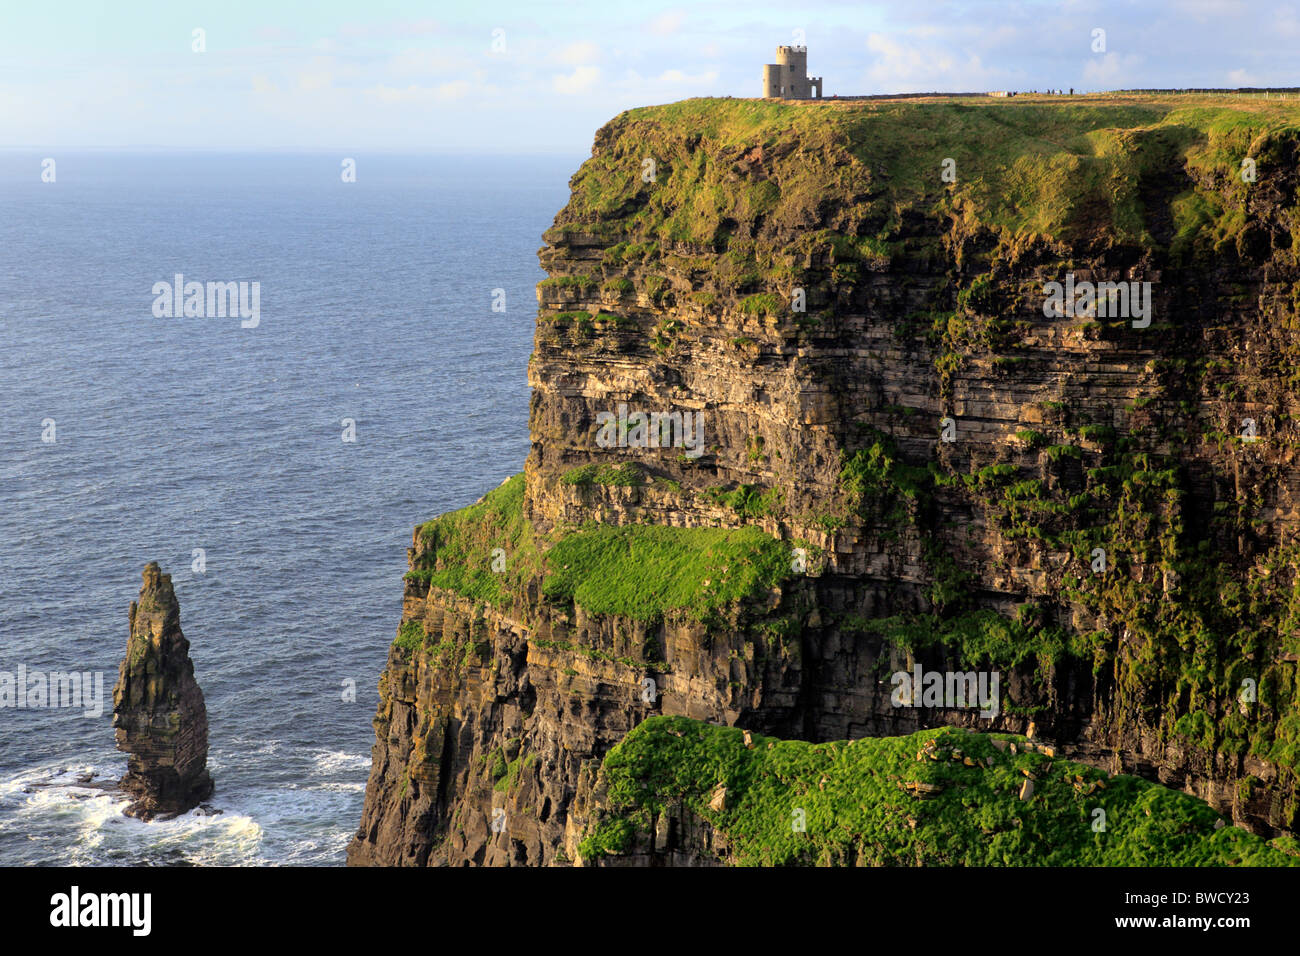 Cliffs of Moher, County Clare, Irland Stockfoto